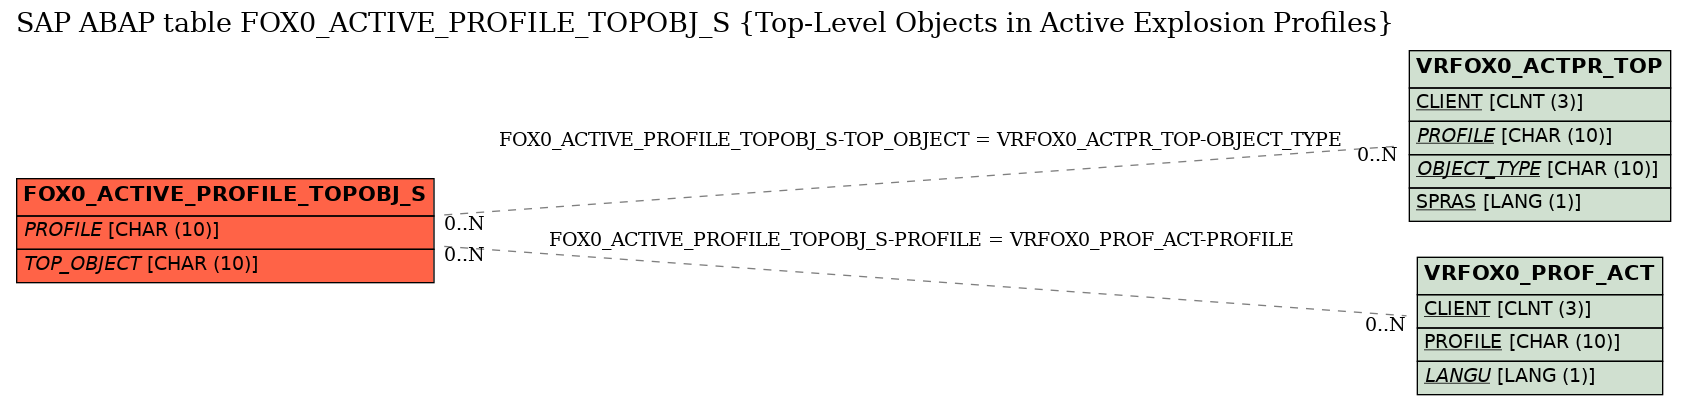 E-R Diagram for table FOX0_ACTIVE_PROFILE_TOPOBJ_S (Top-Level Objects in Active Explosion Profiles)